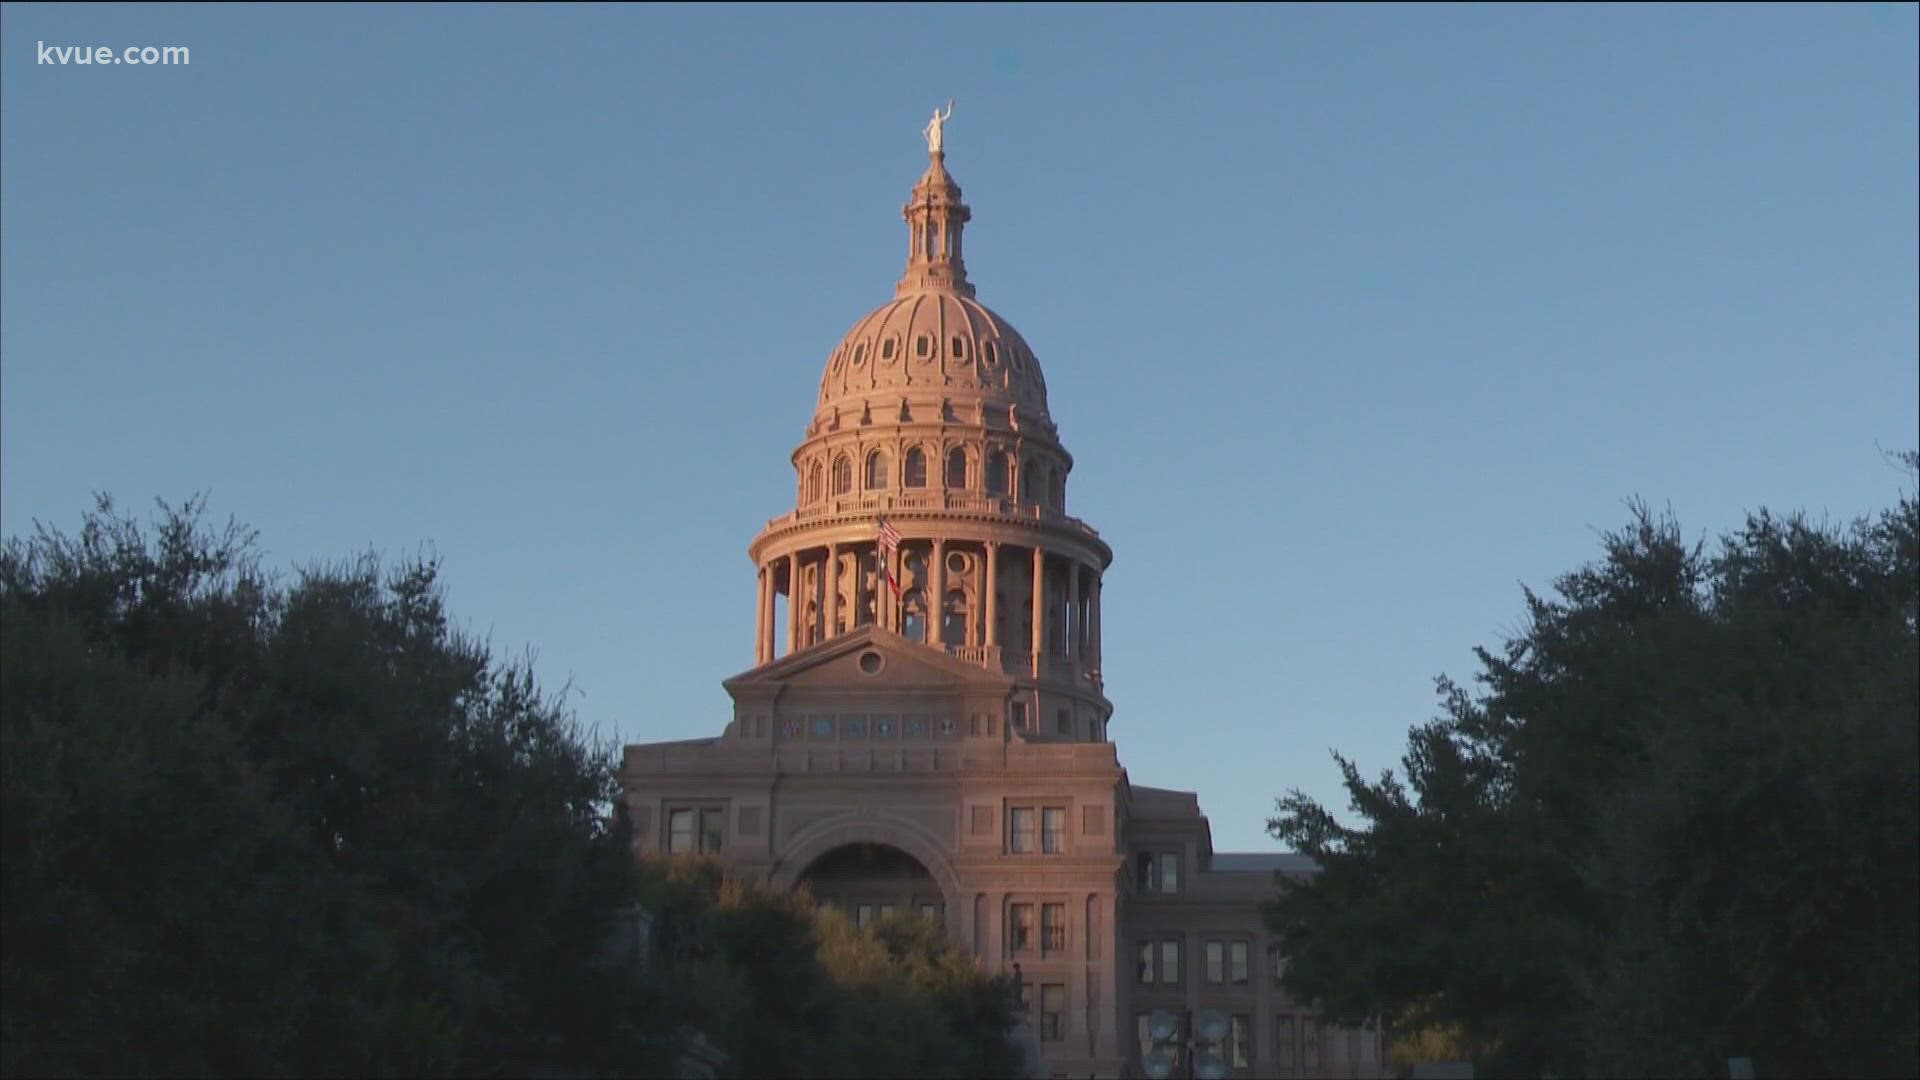 More than 600 new laws take effect in Texas on Sept. 1. KVUE's Hannah Rucker has a breakdown of some of the major laws you need to know about.